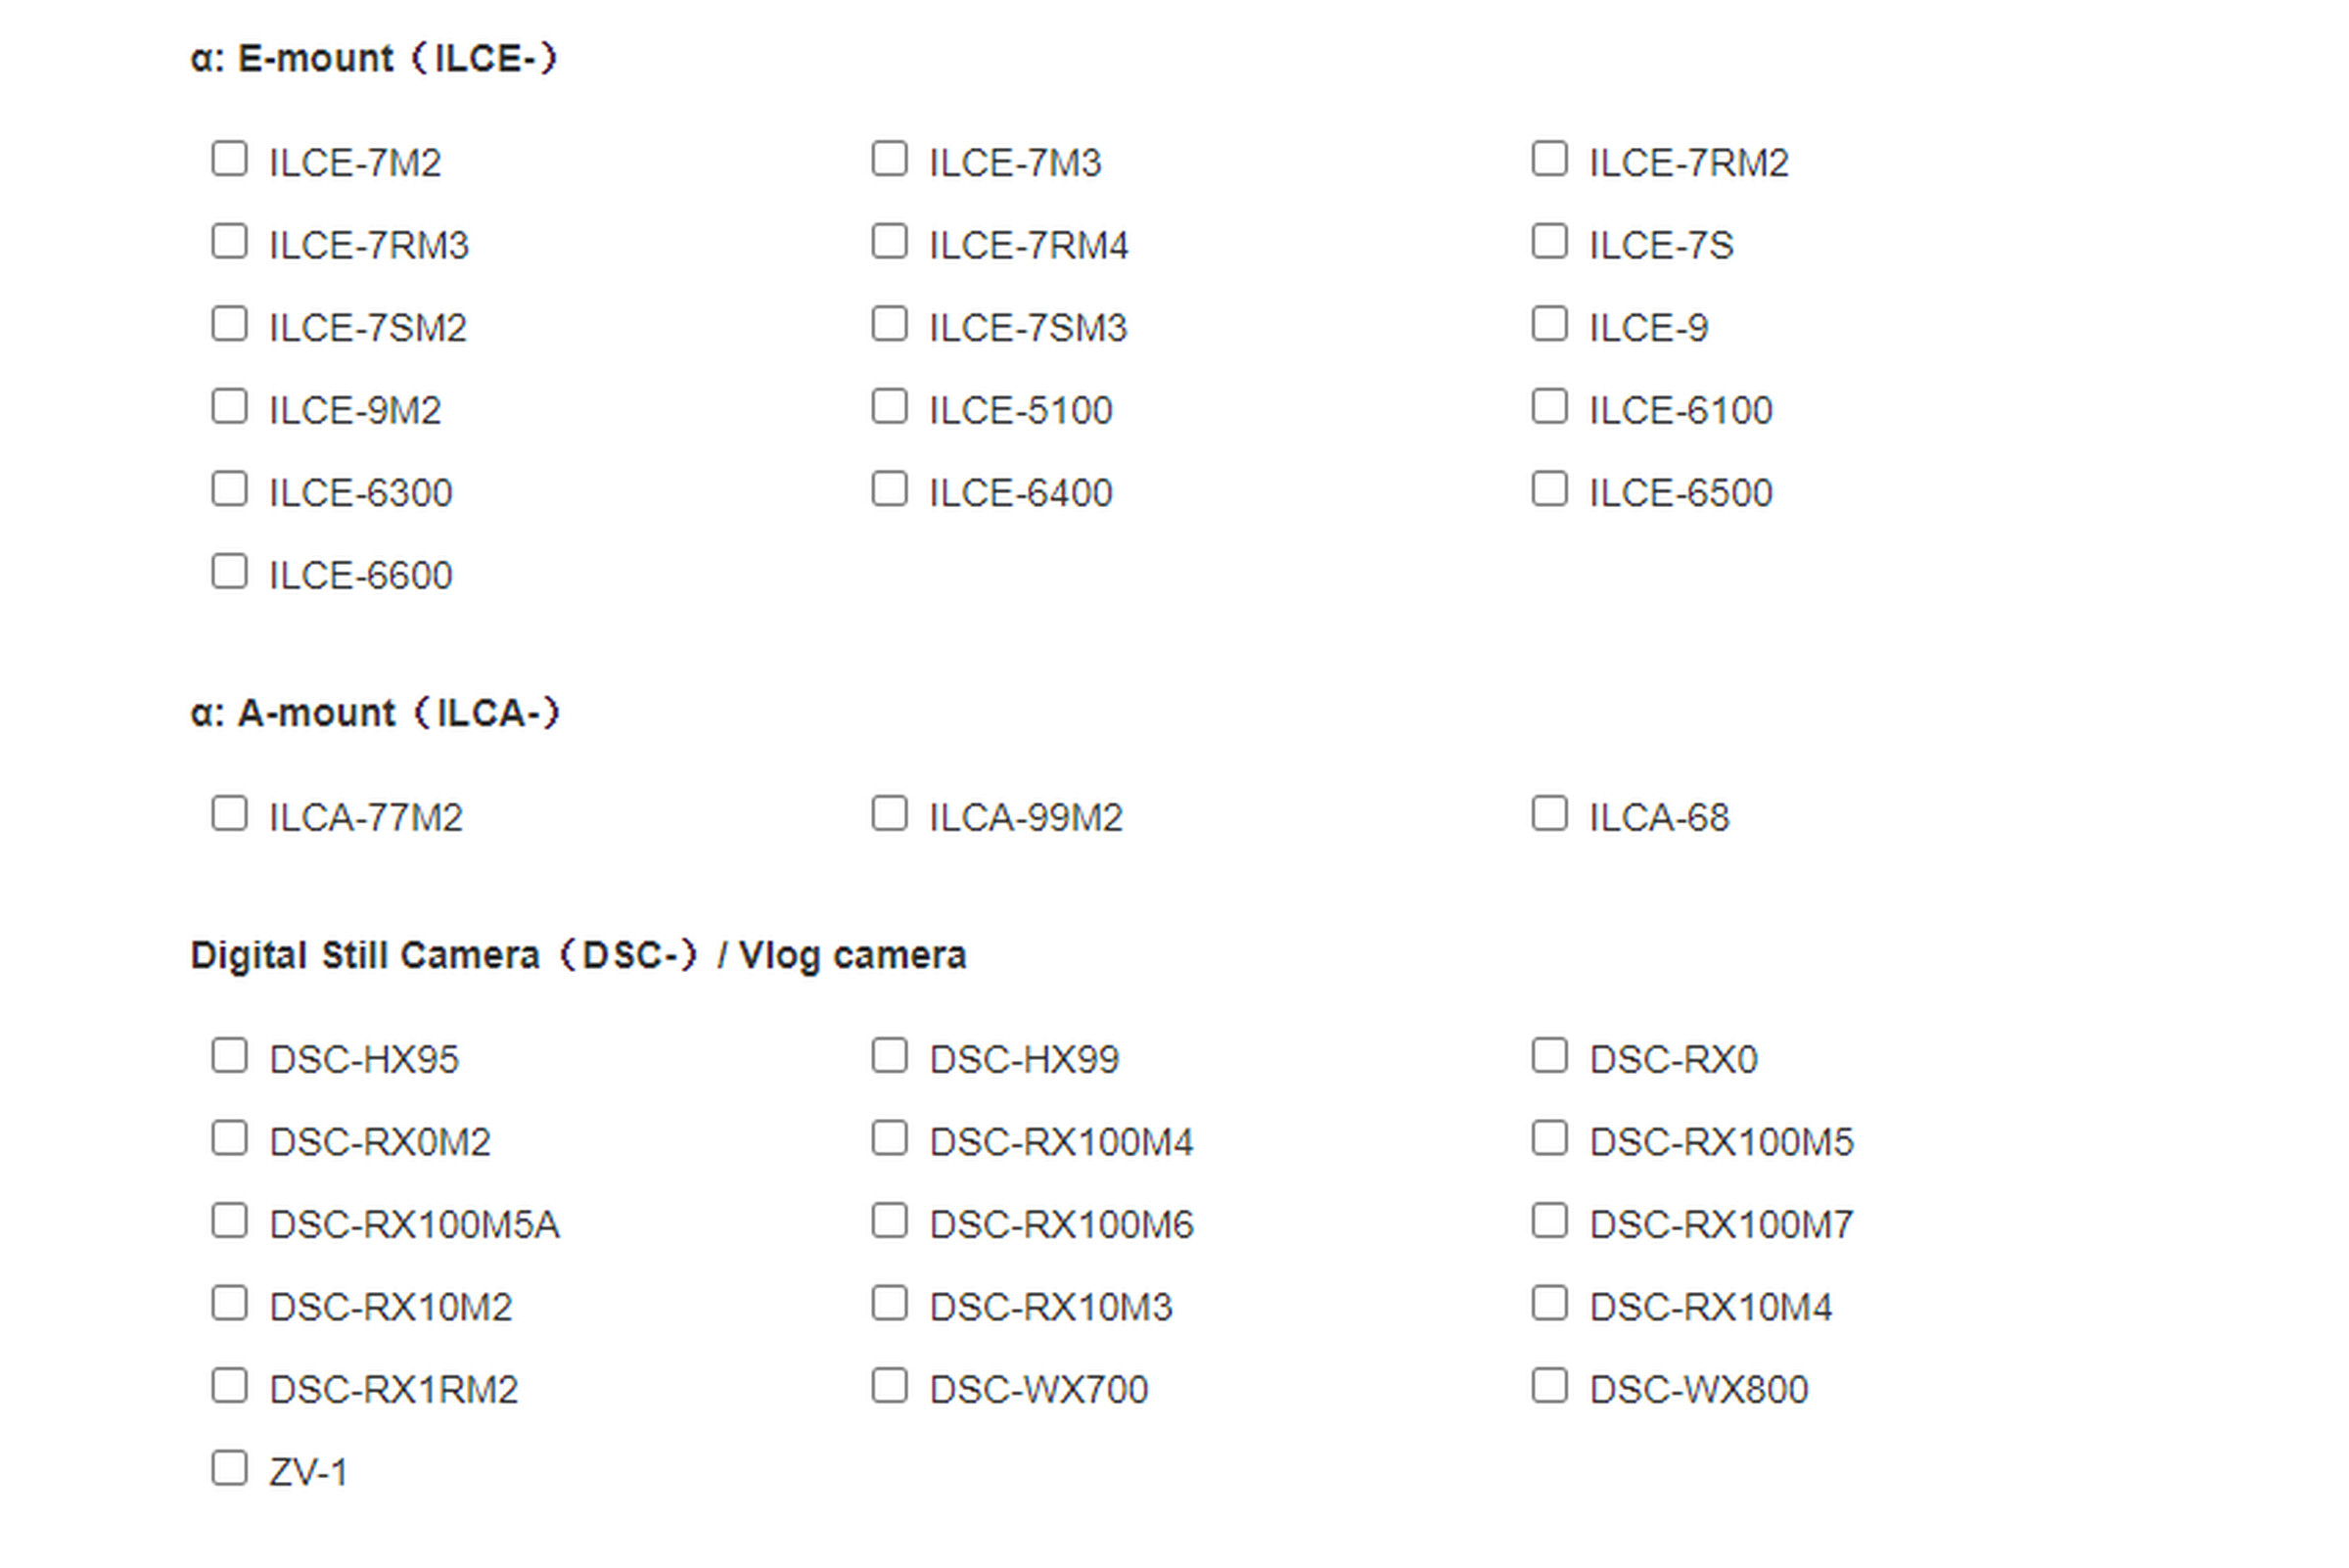 A list of supported cameras from Sony’s website.